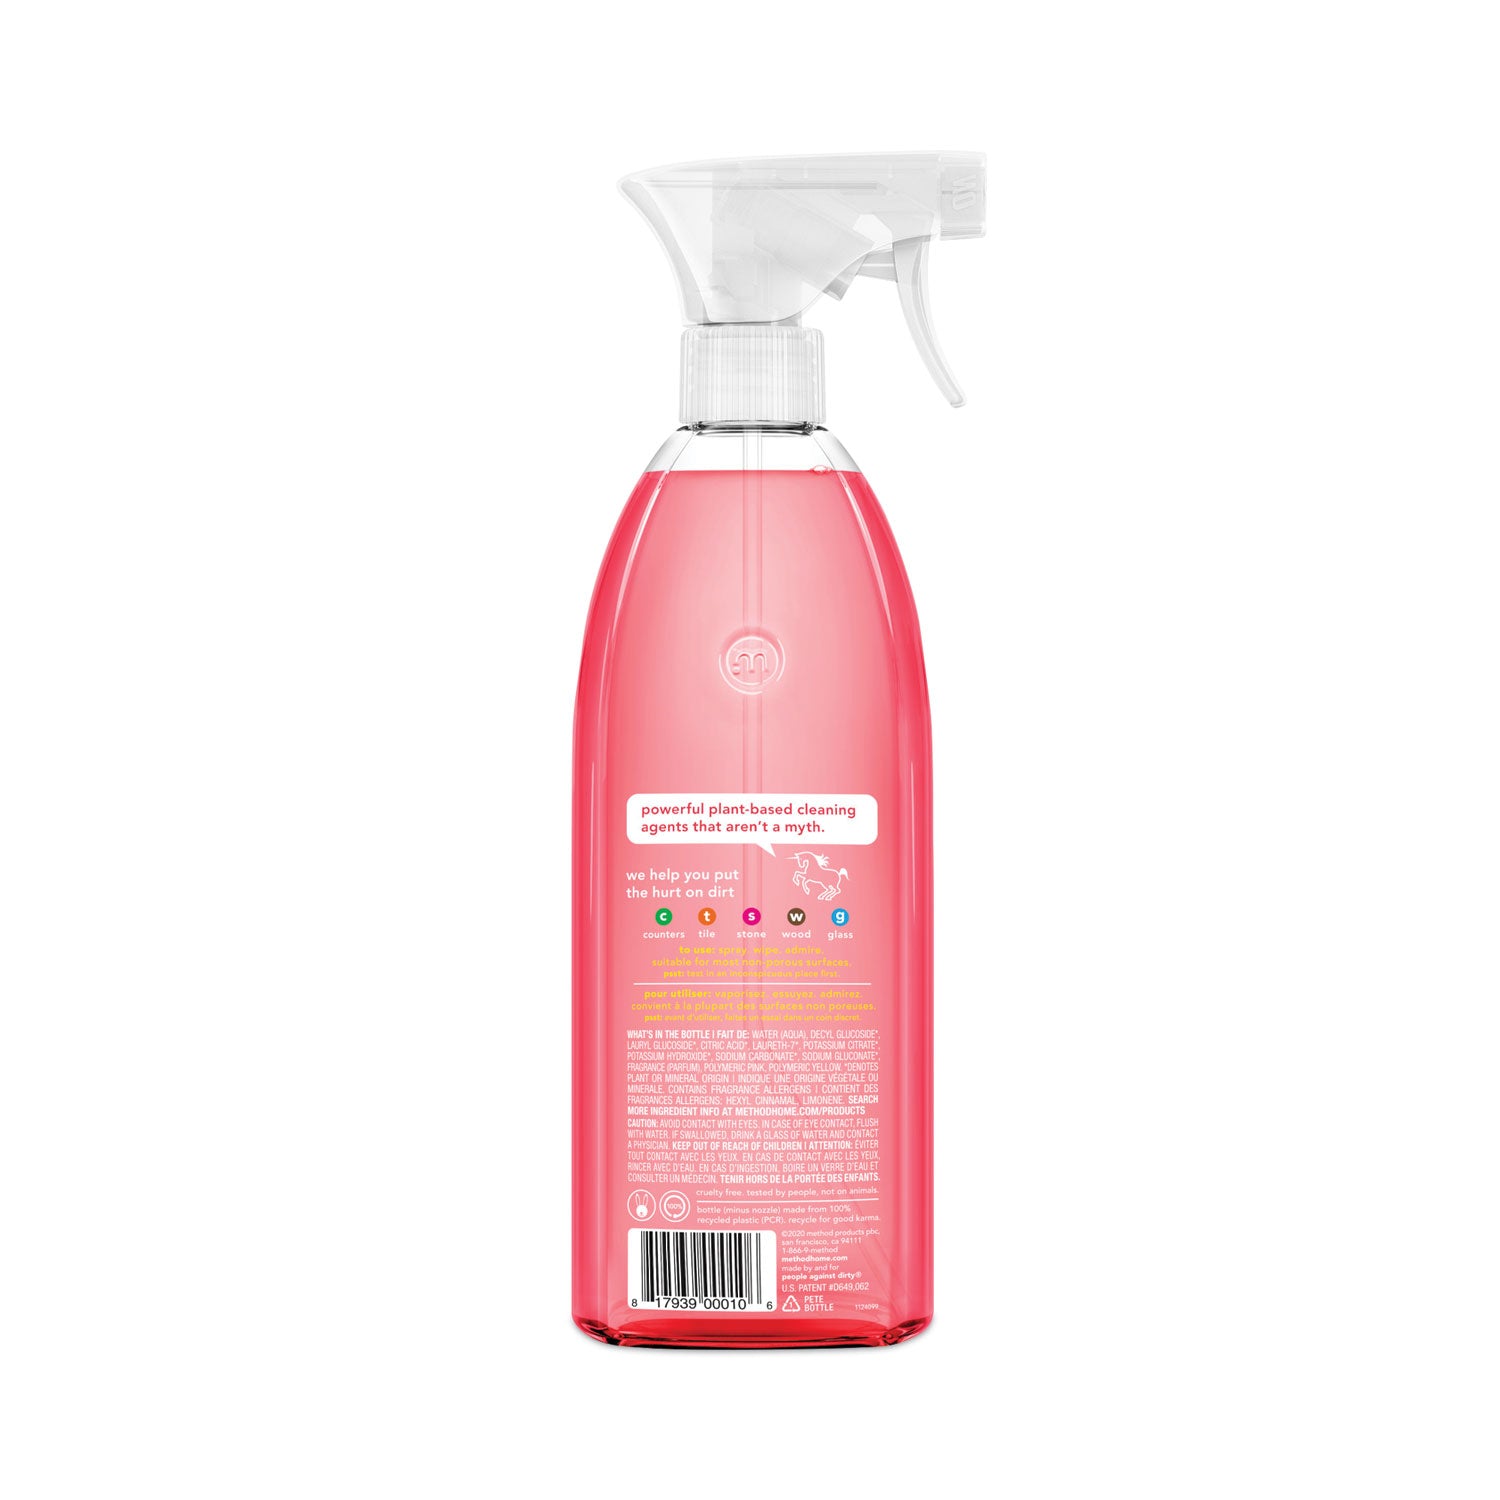 all-surface-cleaner-pink-grapefruit-28-oz-spray-bottle-8-carton_mth00010ct - 2